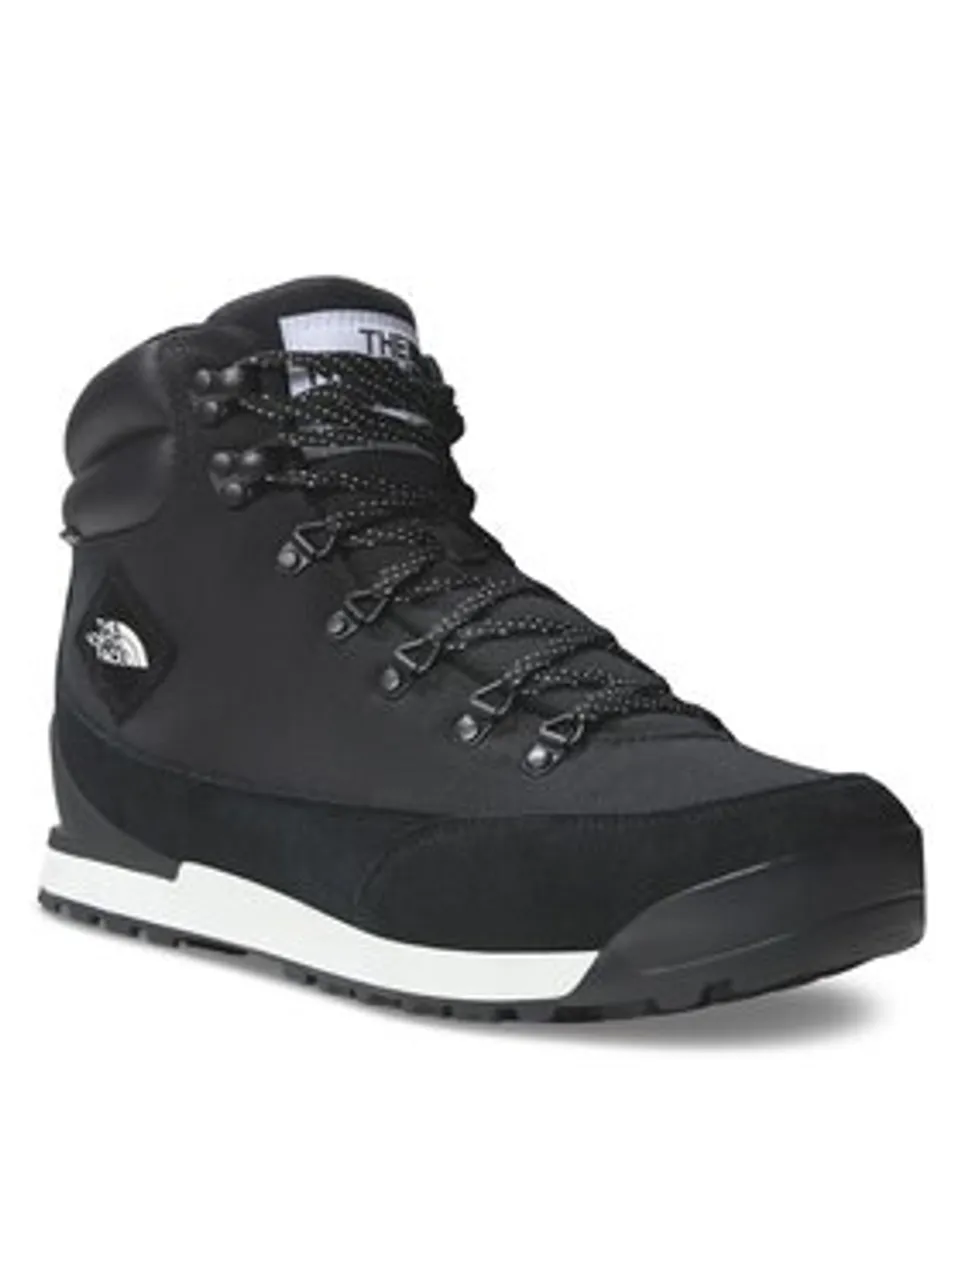 The North Face Trekkingschuhe M Back-To-Berkeley Iv Textile WpNF0A8177KY41 Schwarz